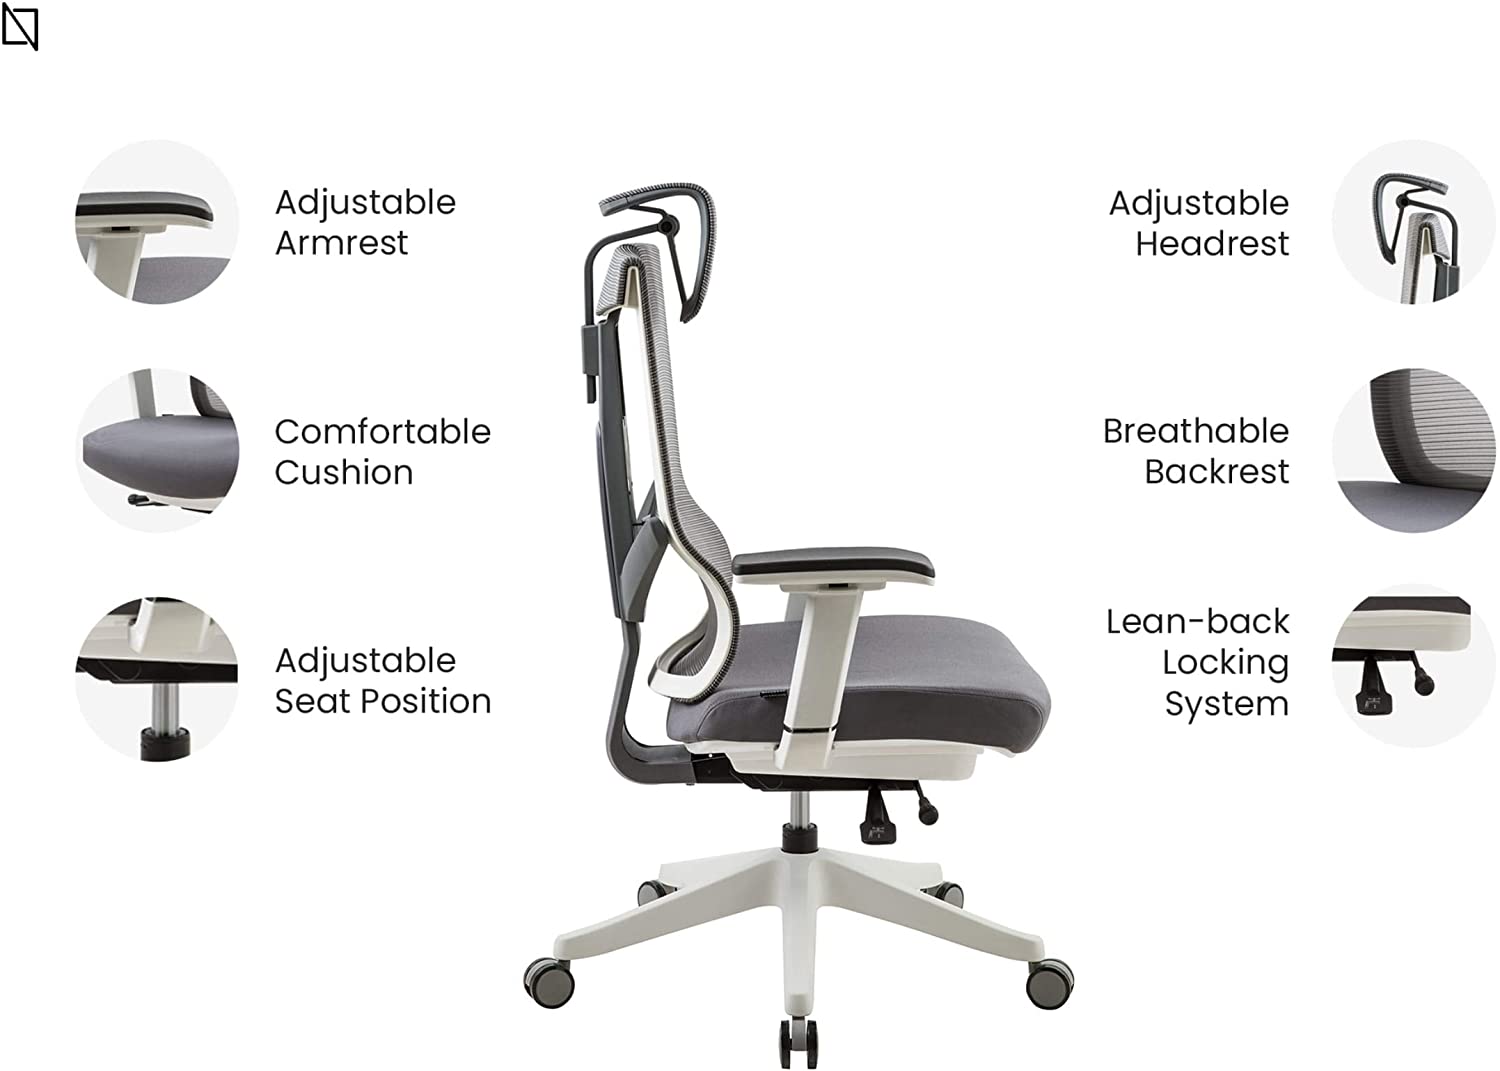 Navodesk Aero Fabric Chairs Specifications - Navodesk